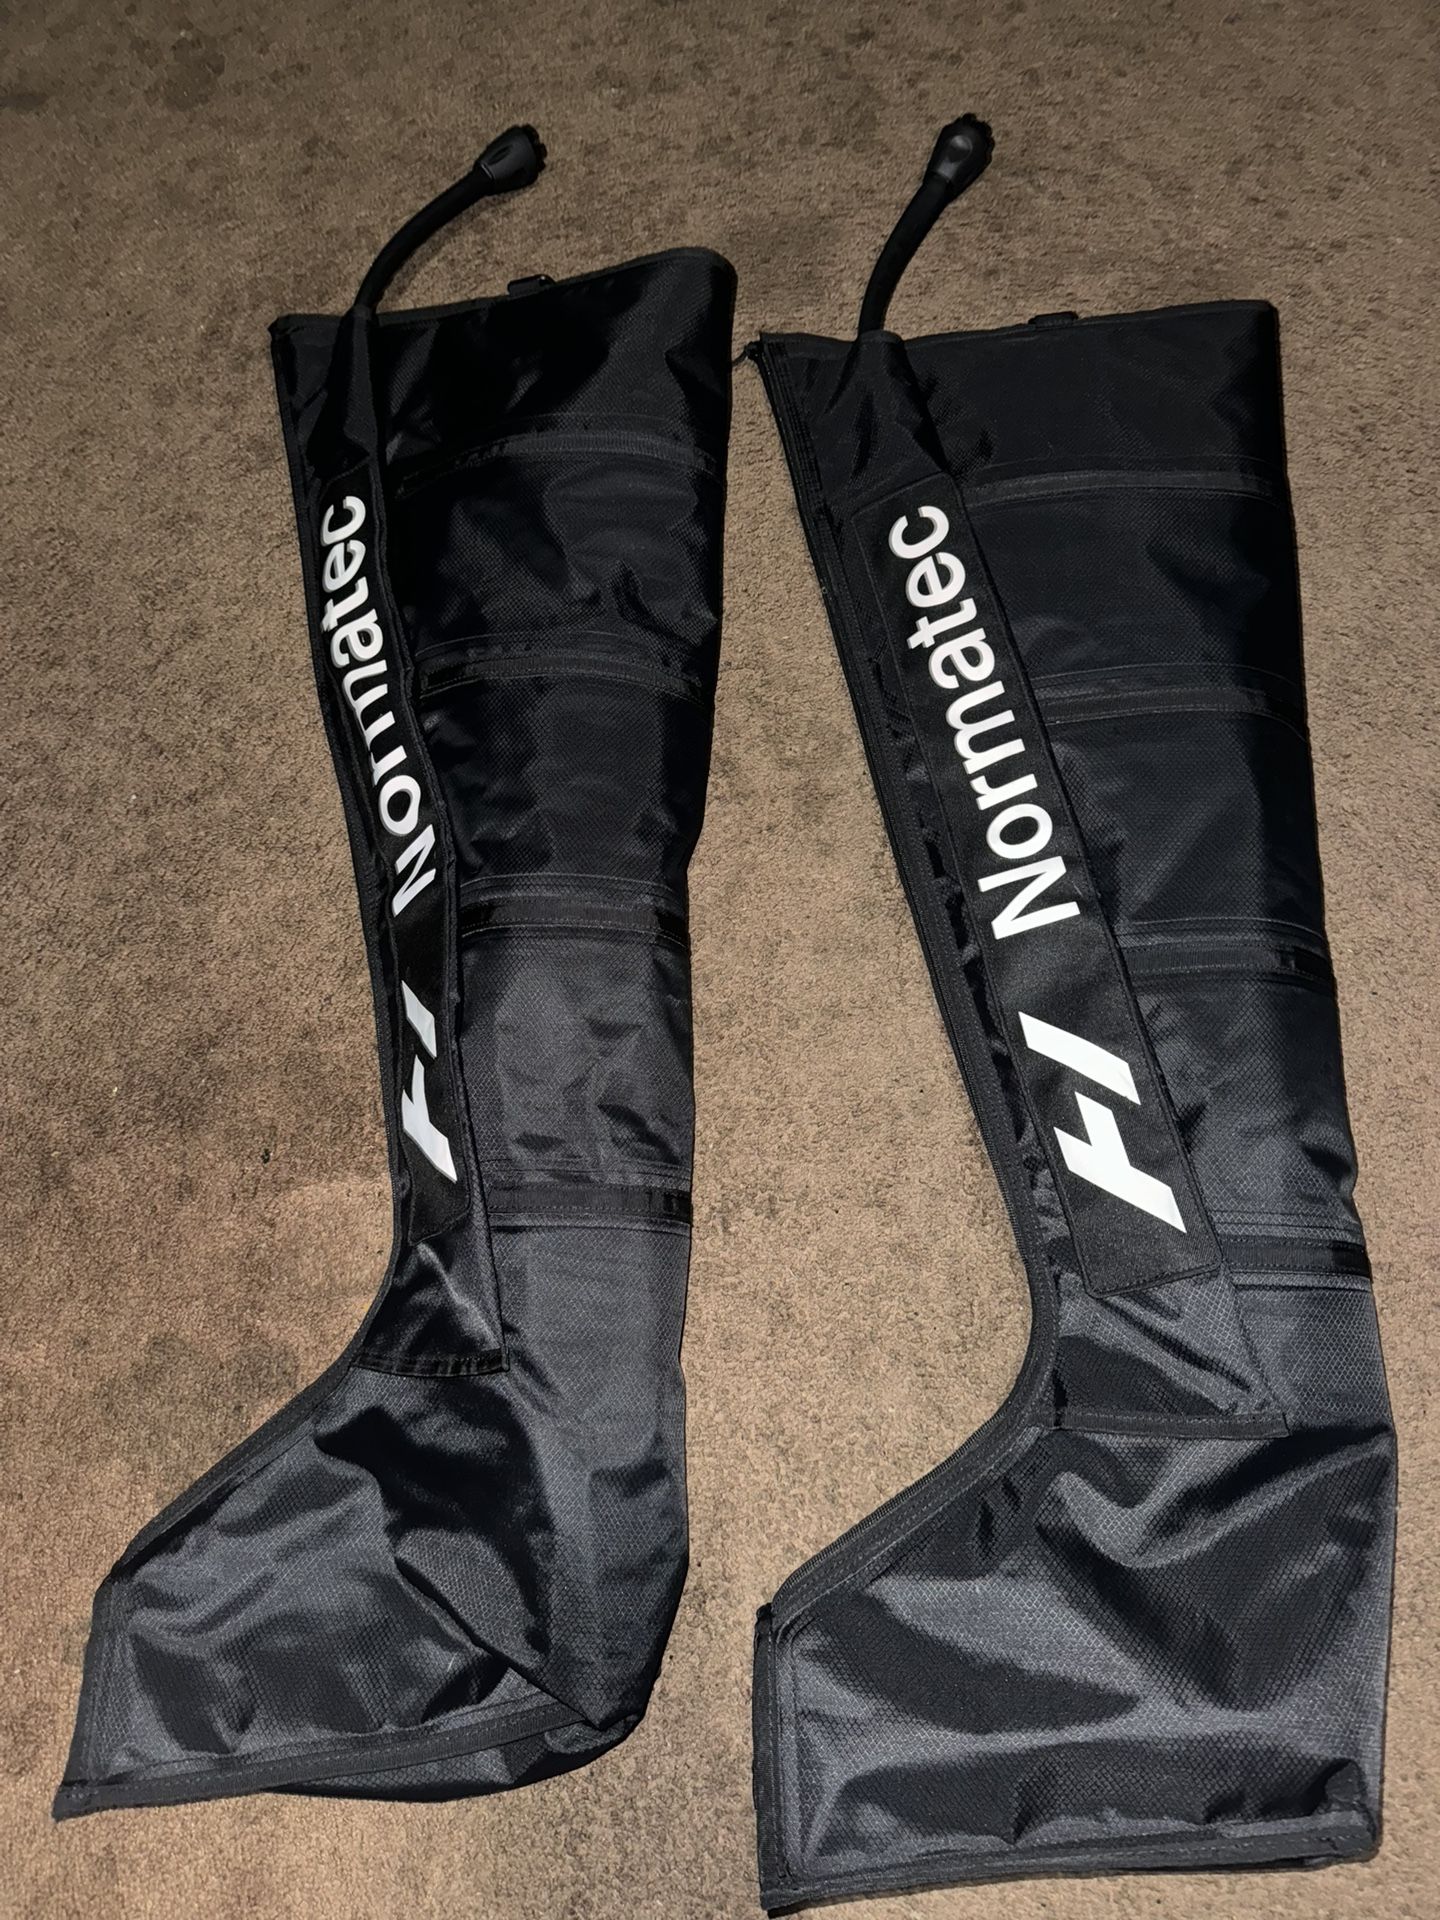 Normatec 3 Legs Compression with Normatec Backpack